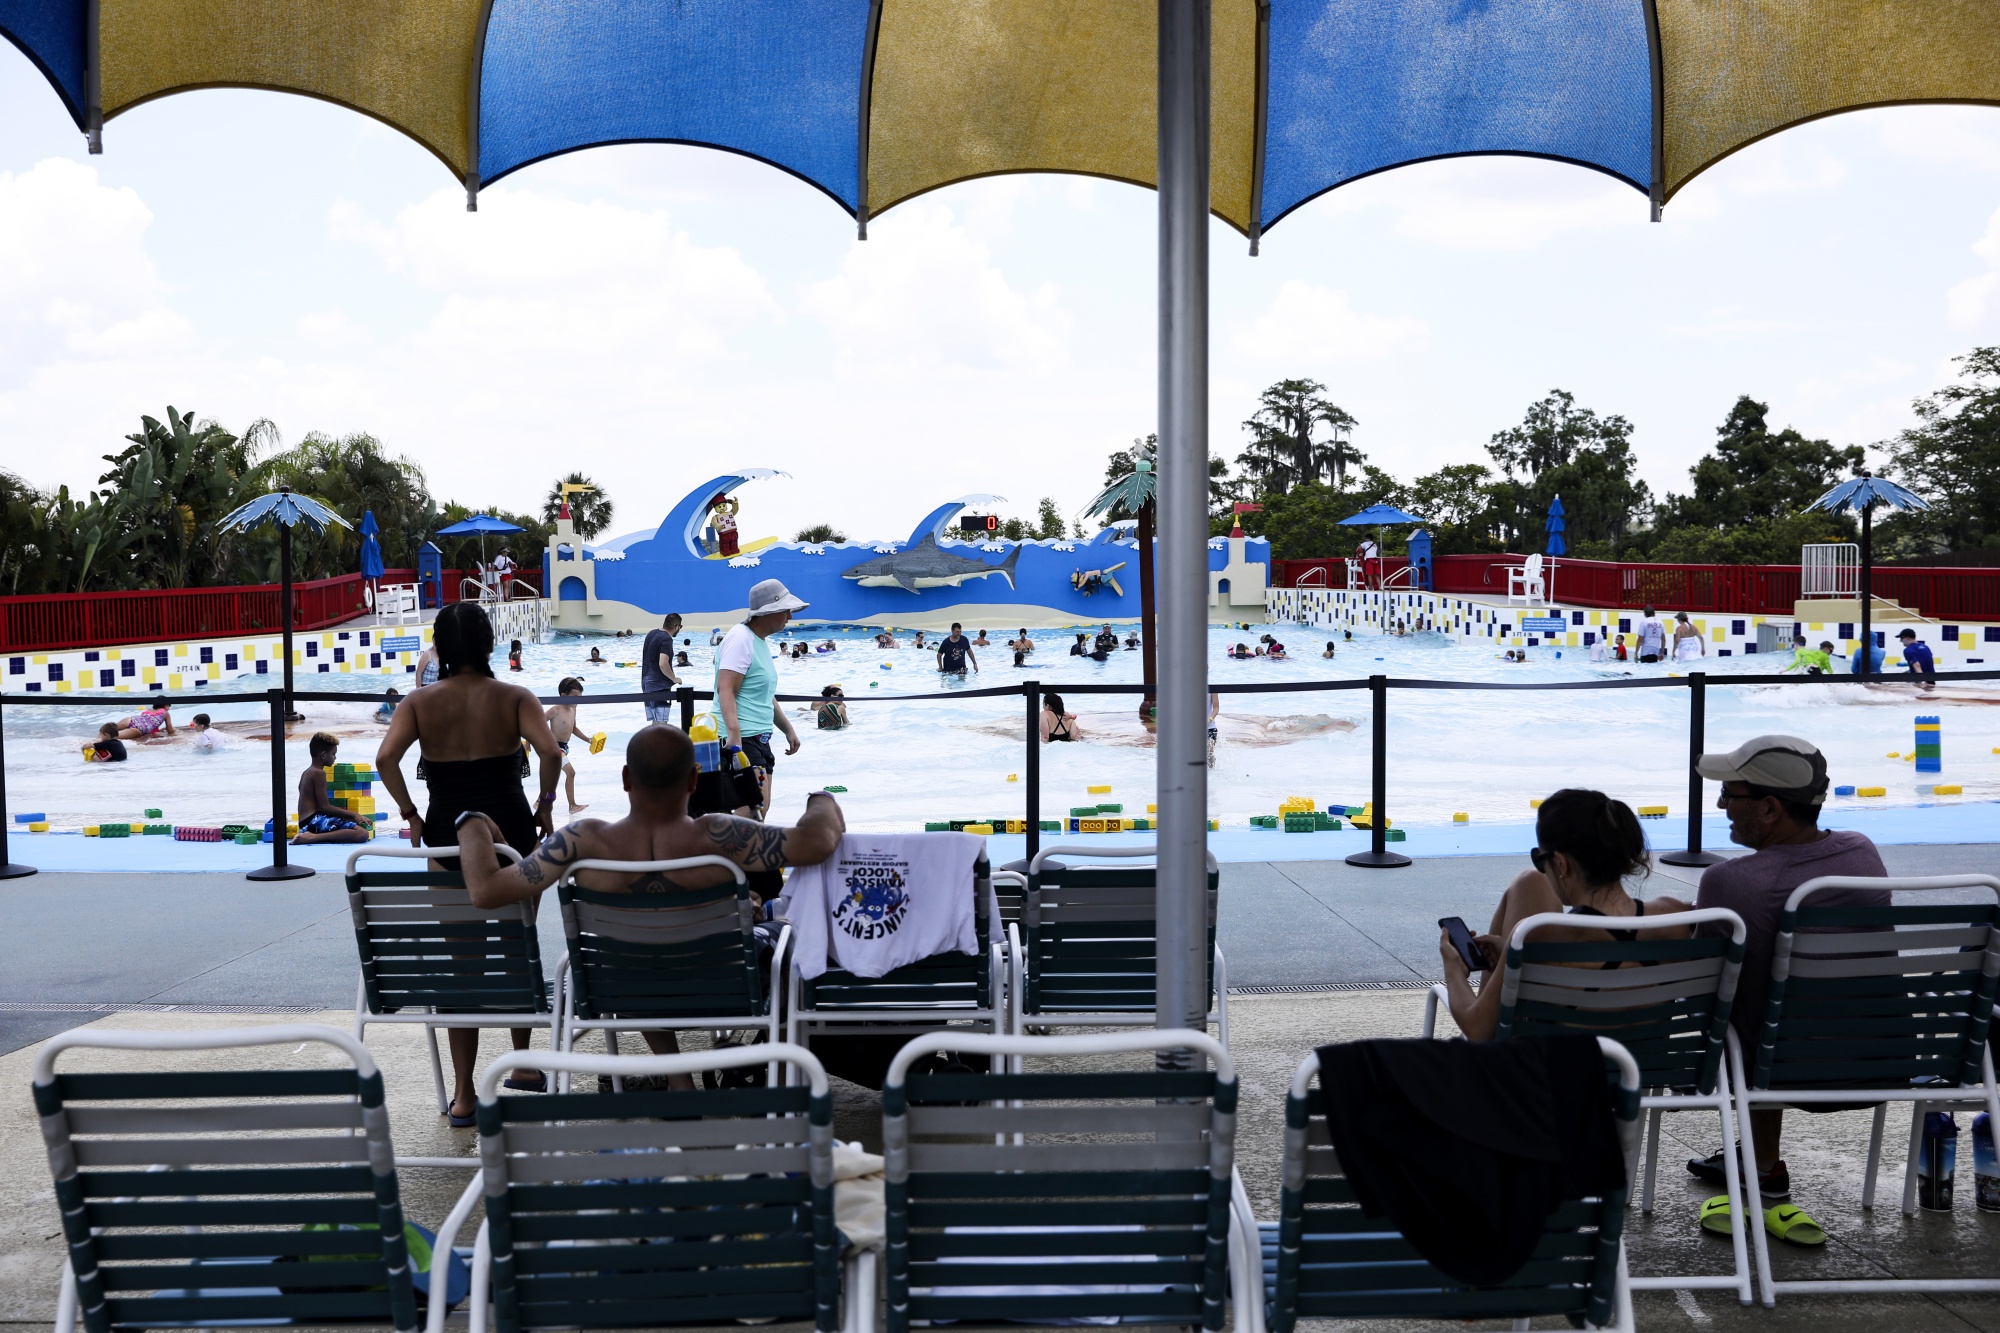 Visitors use the wave pool at the Legoland theme park in Winter Haven, Florida, on June 10.